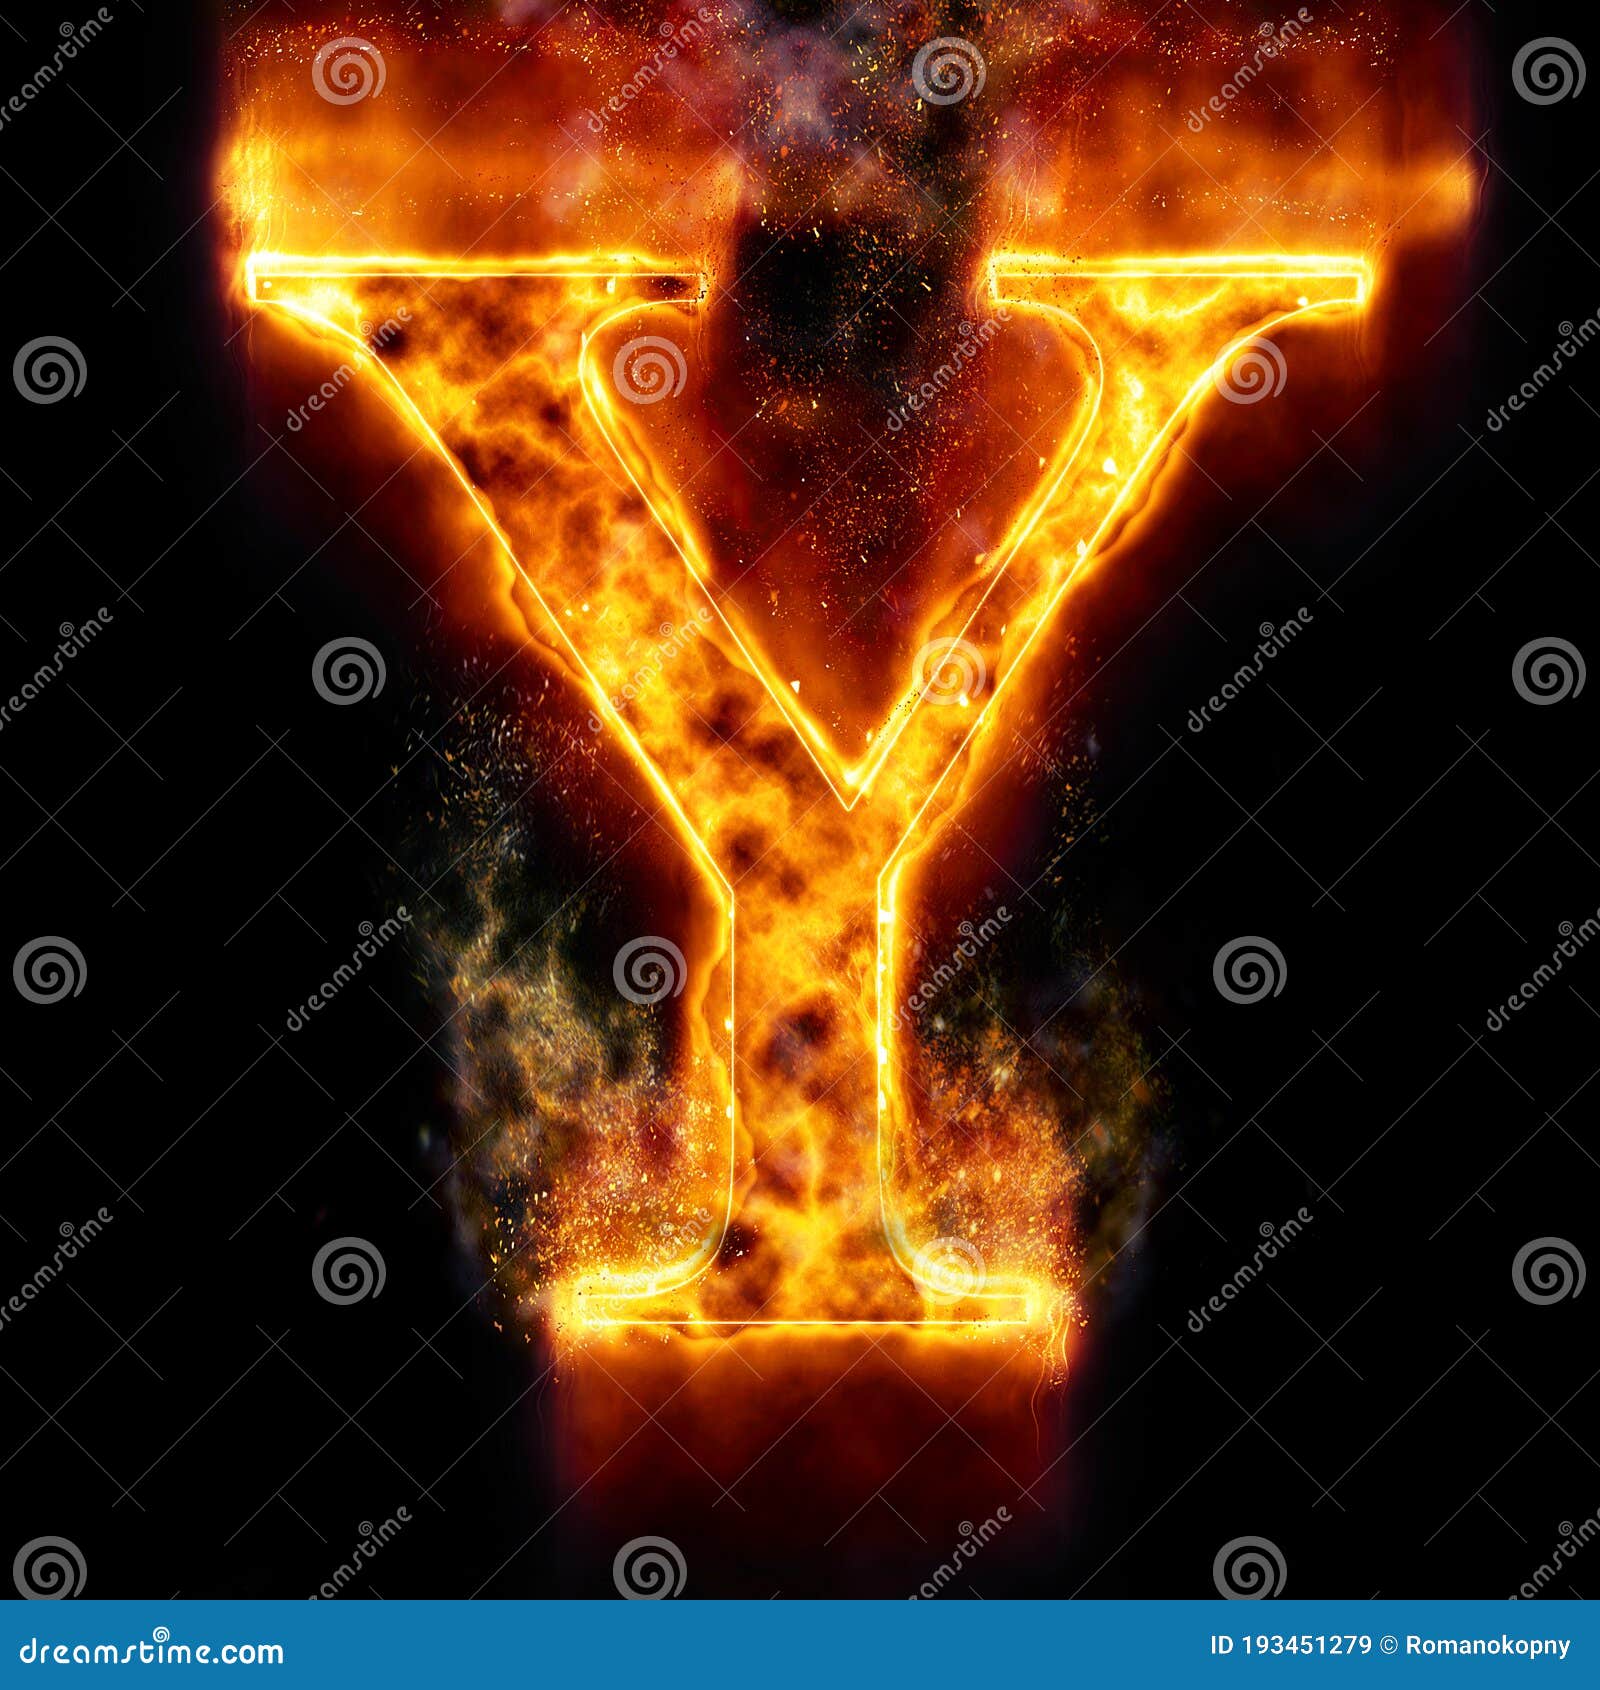 Fire Letter Y Stock Illustrations 152 Fire Letter Y Stock Illustrations Vectors Clipart Dreamstime